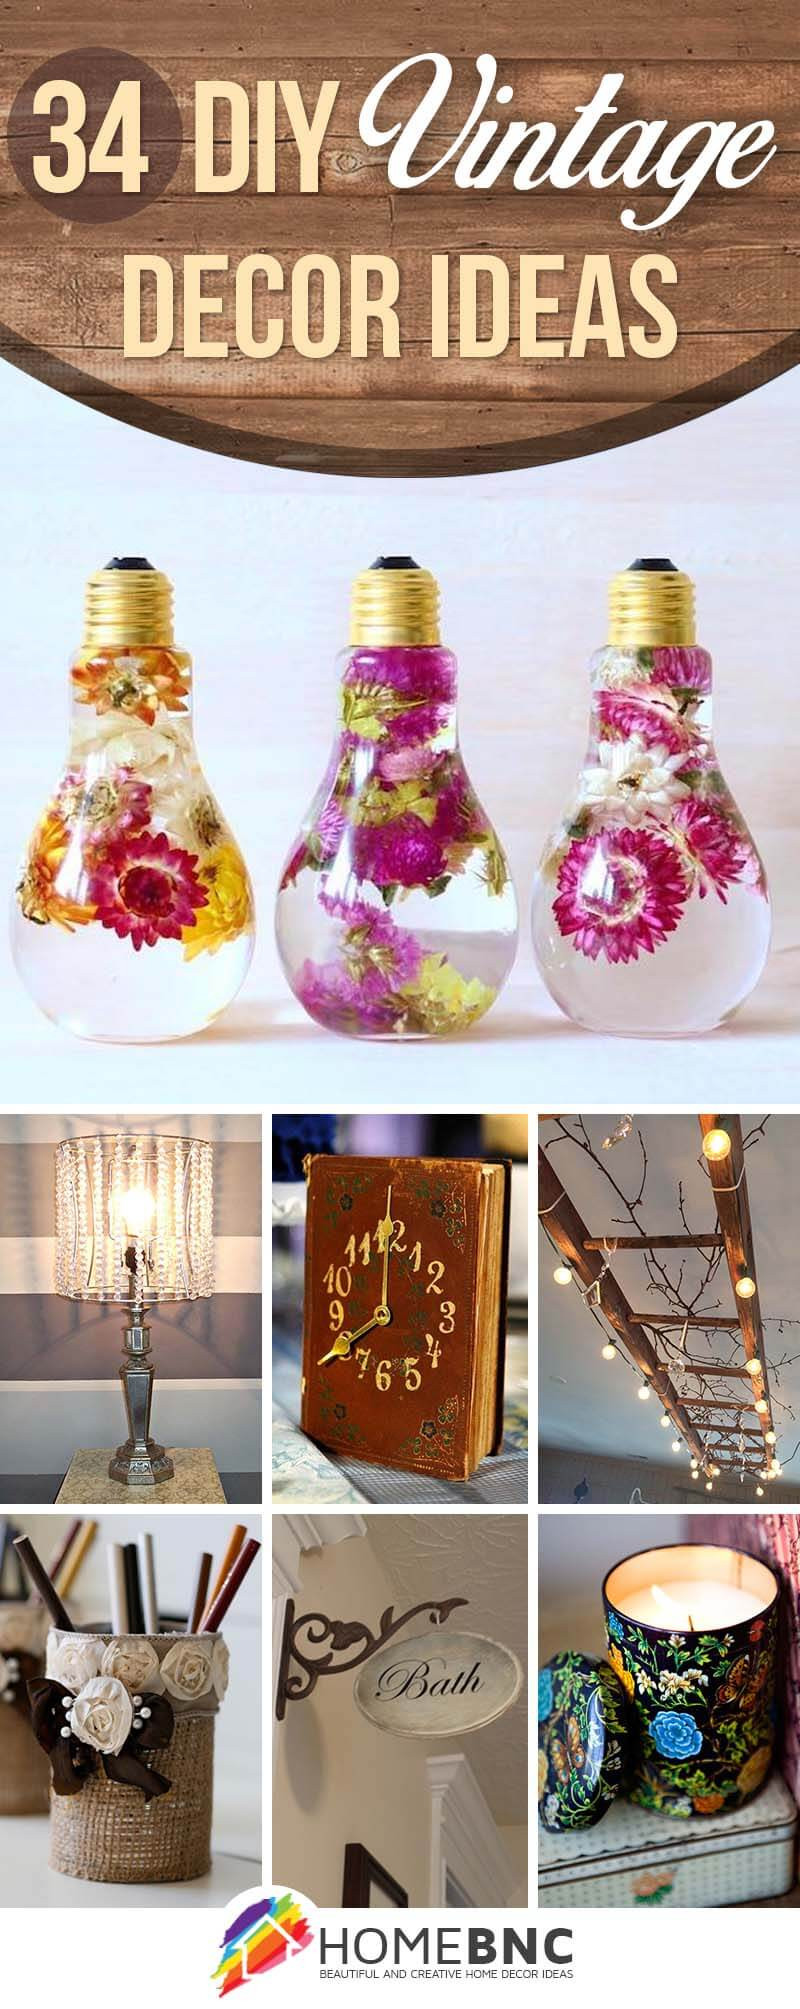 DIY Vintage Room Decor
 34 Best DIY Vintage Decor Ideas and Projects for 2017